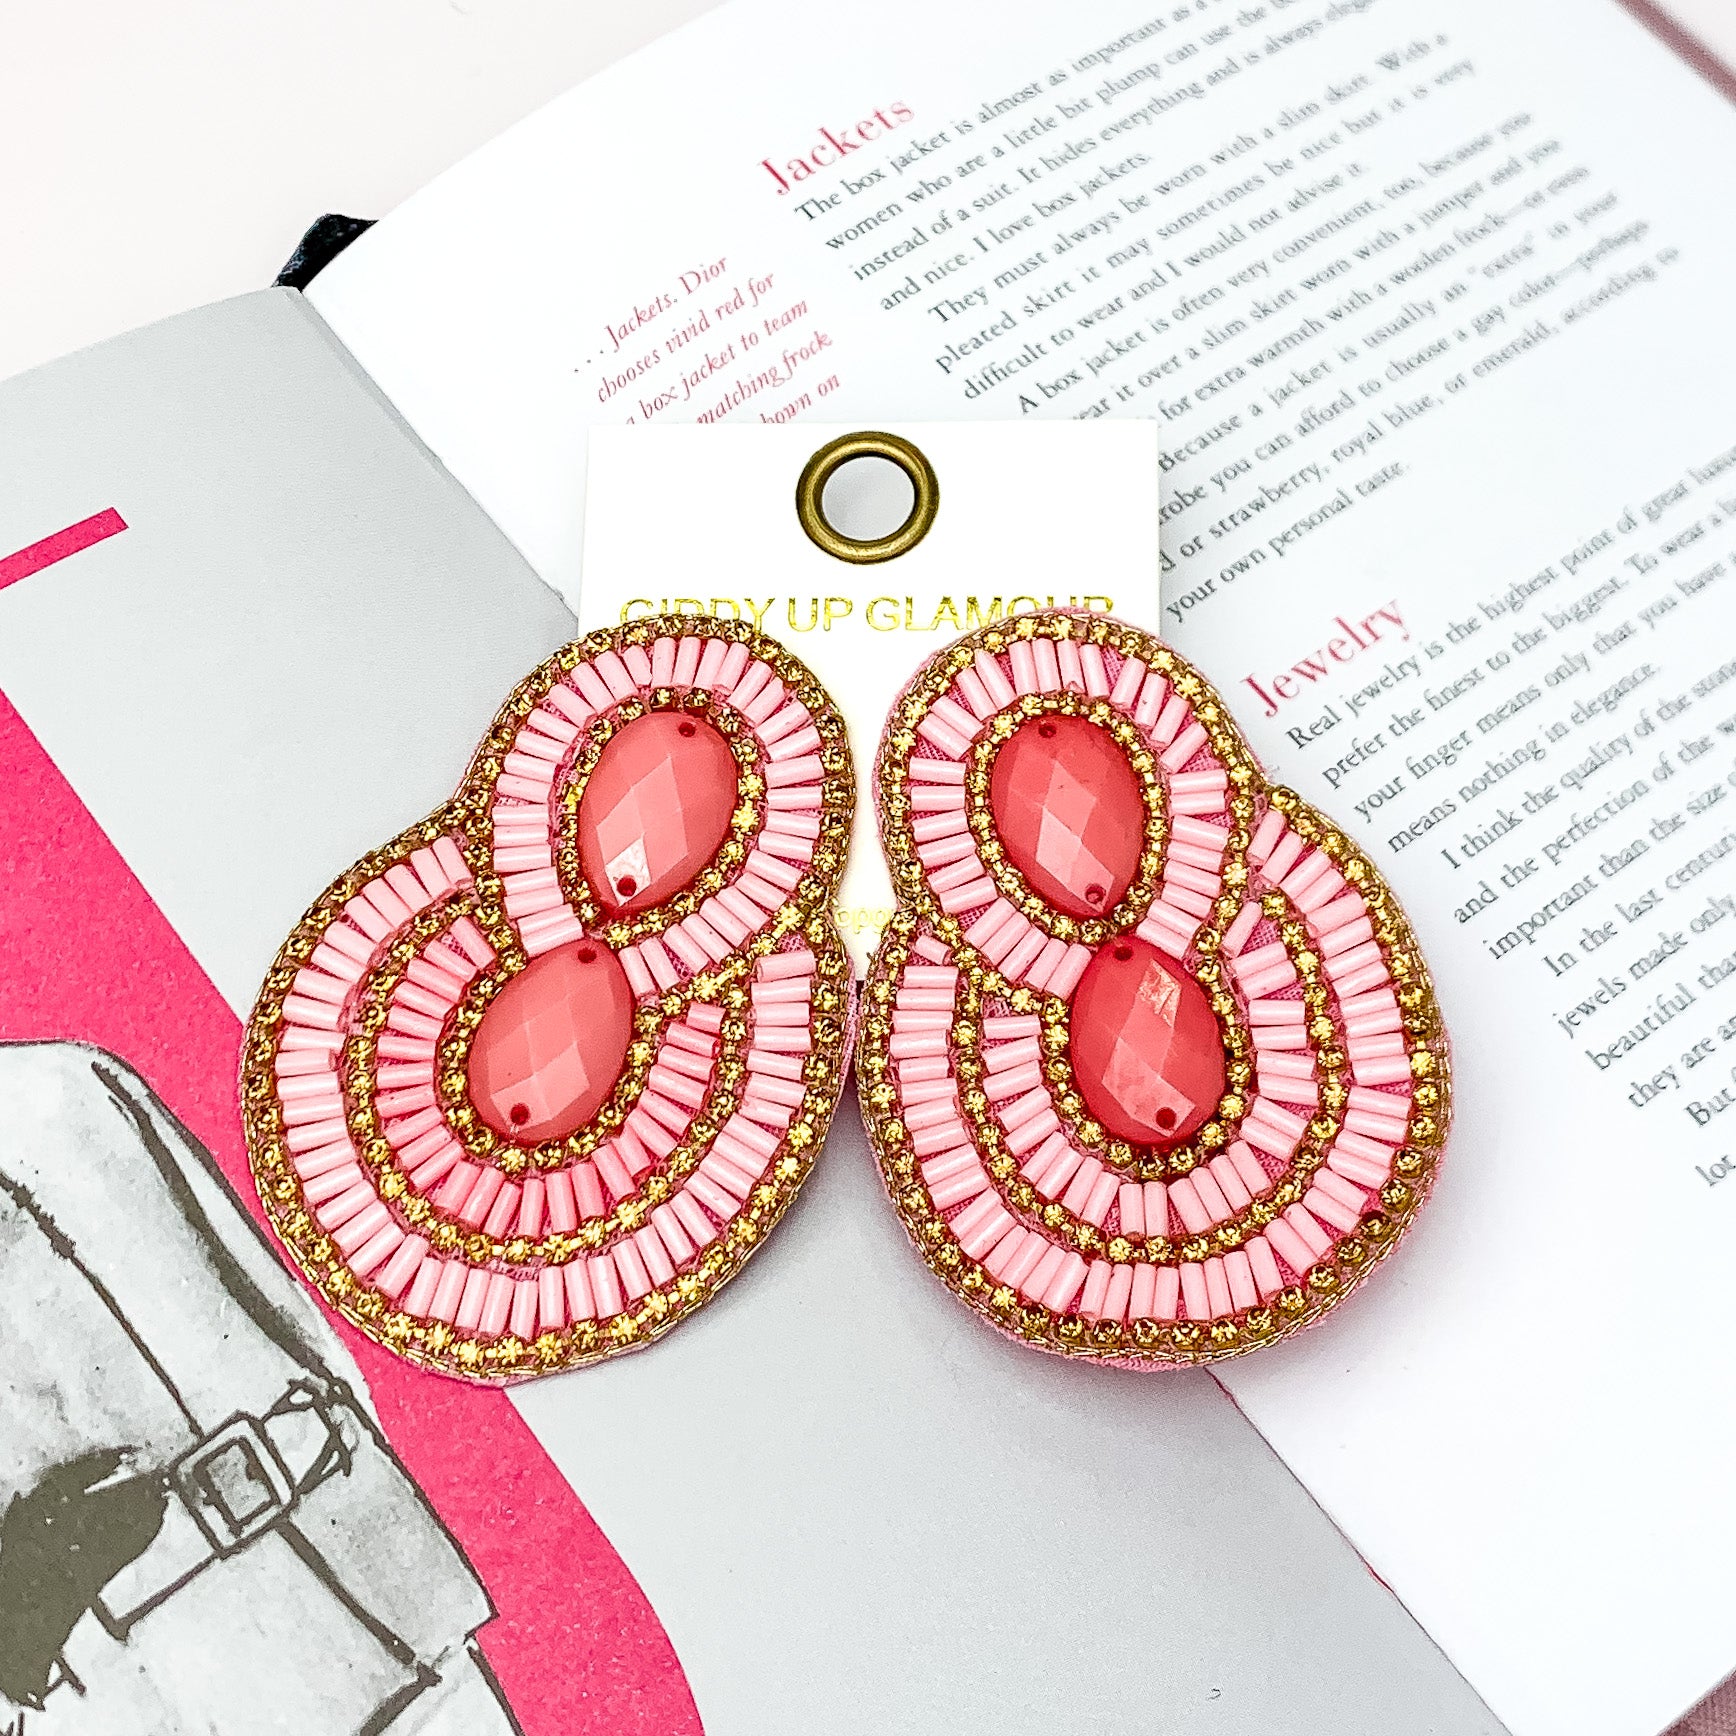 Dazzling Oval Earrings Outlined in Gold Tone Crystals with Beads in Light Pink. Pictured on a white background with a book opened behind the earrings.